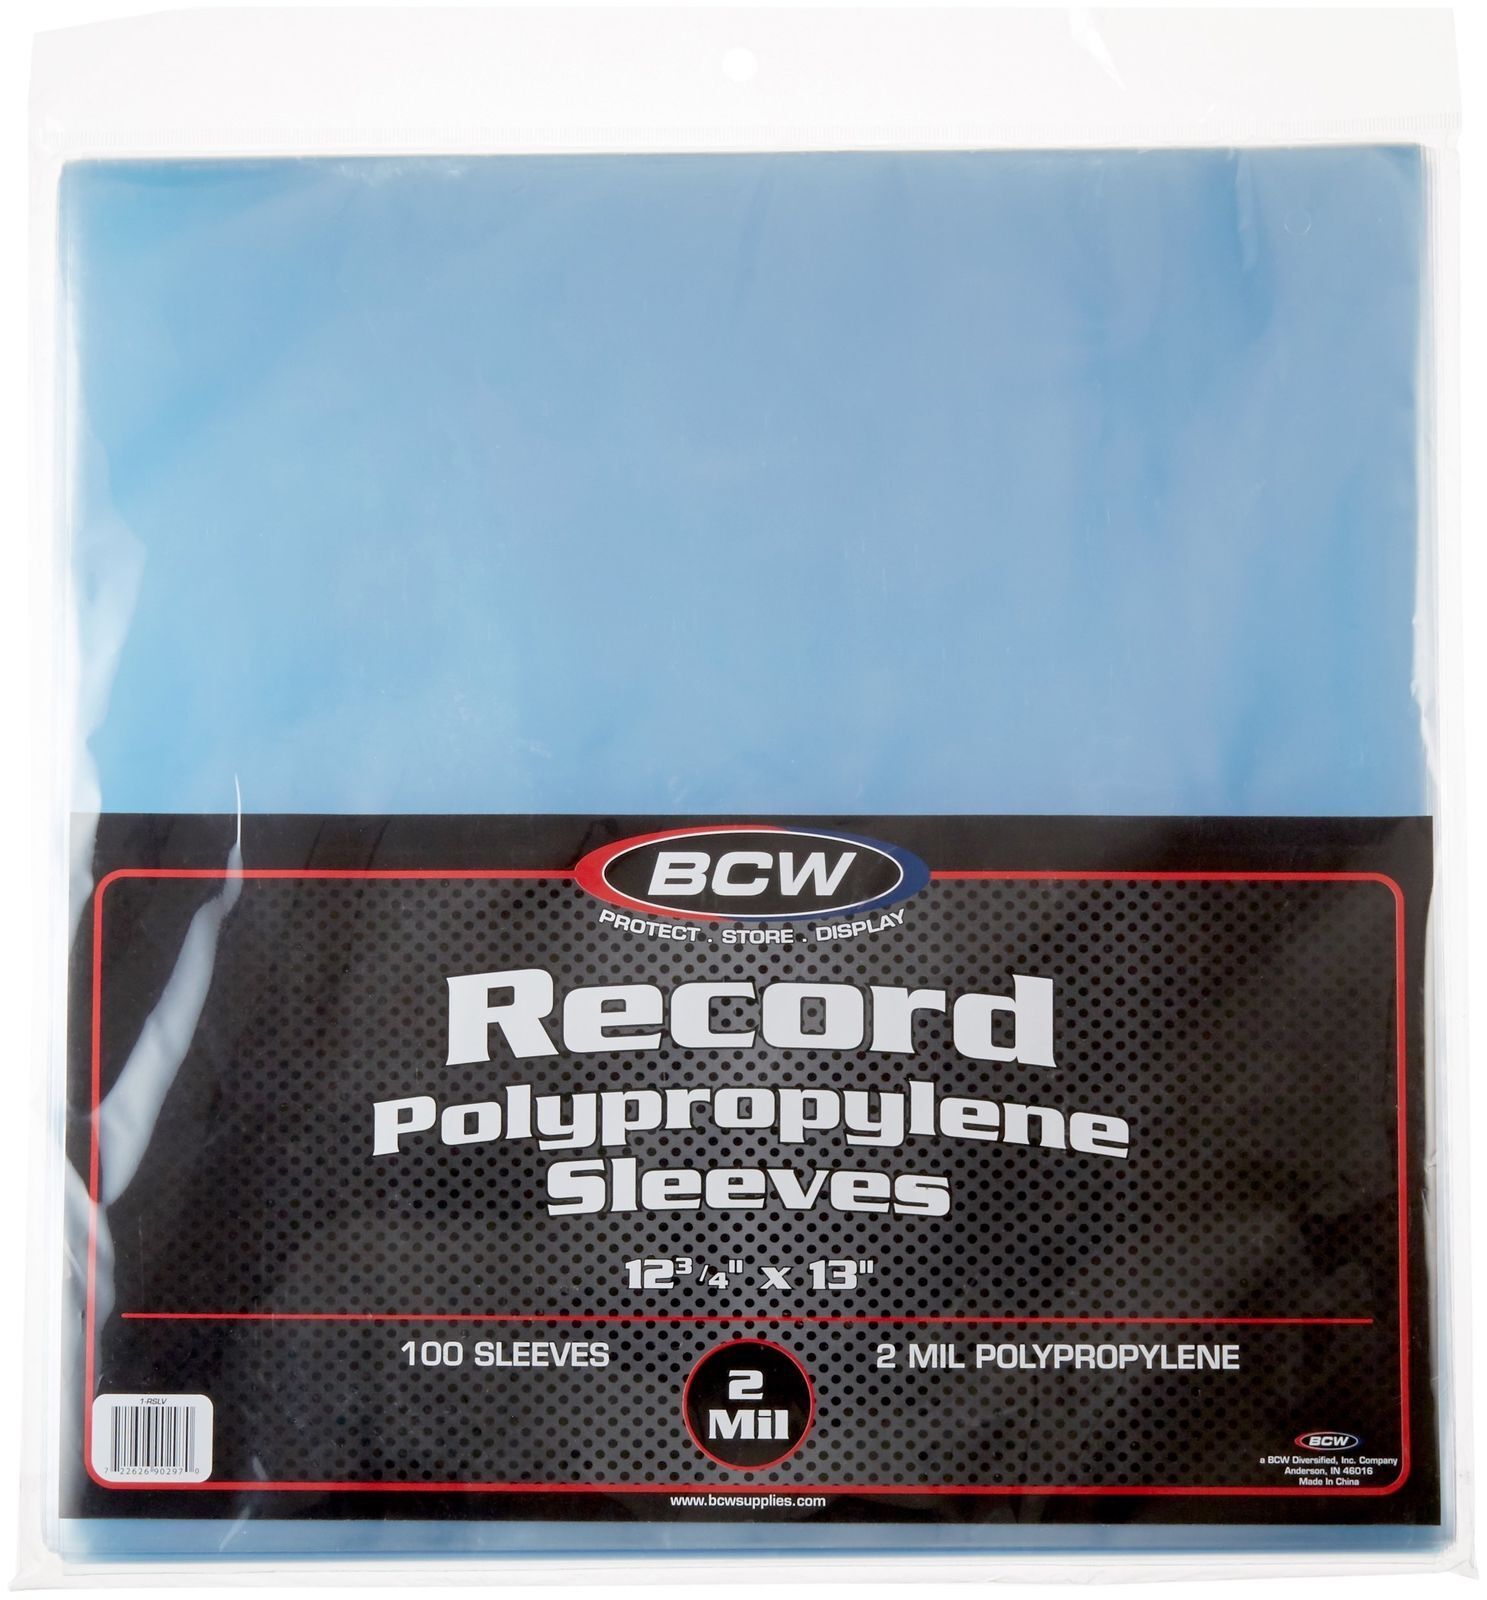 200 BCW Record Vinyl Album Clear Plastic Outer Sleeves Bags Covers 33 RPM LP  BCW 1RSLV